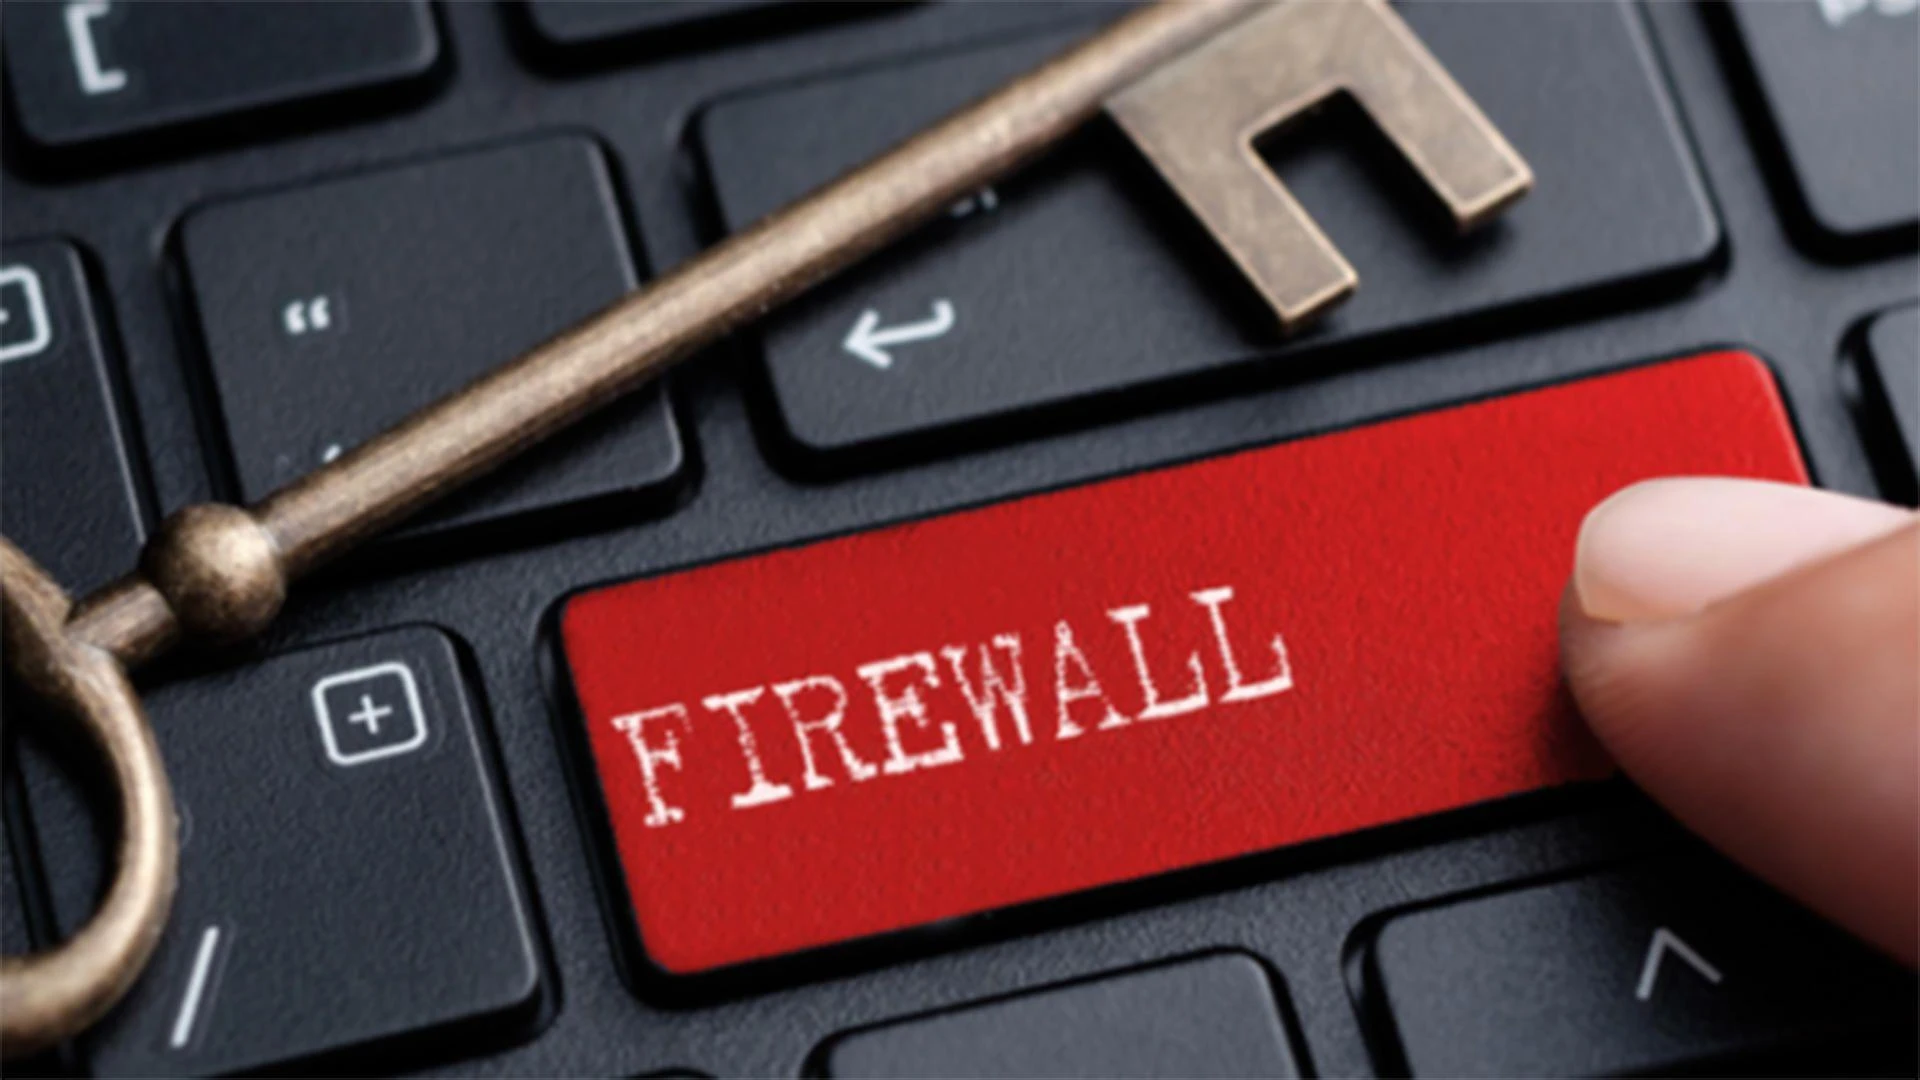 6 How to most effectively configure a firewall